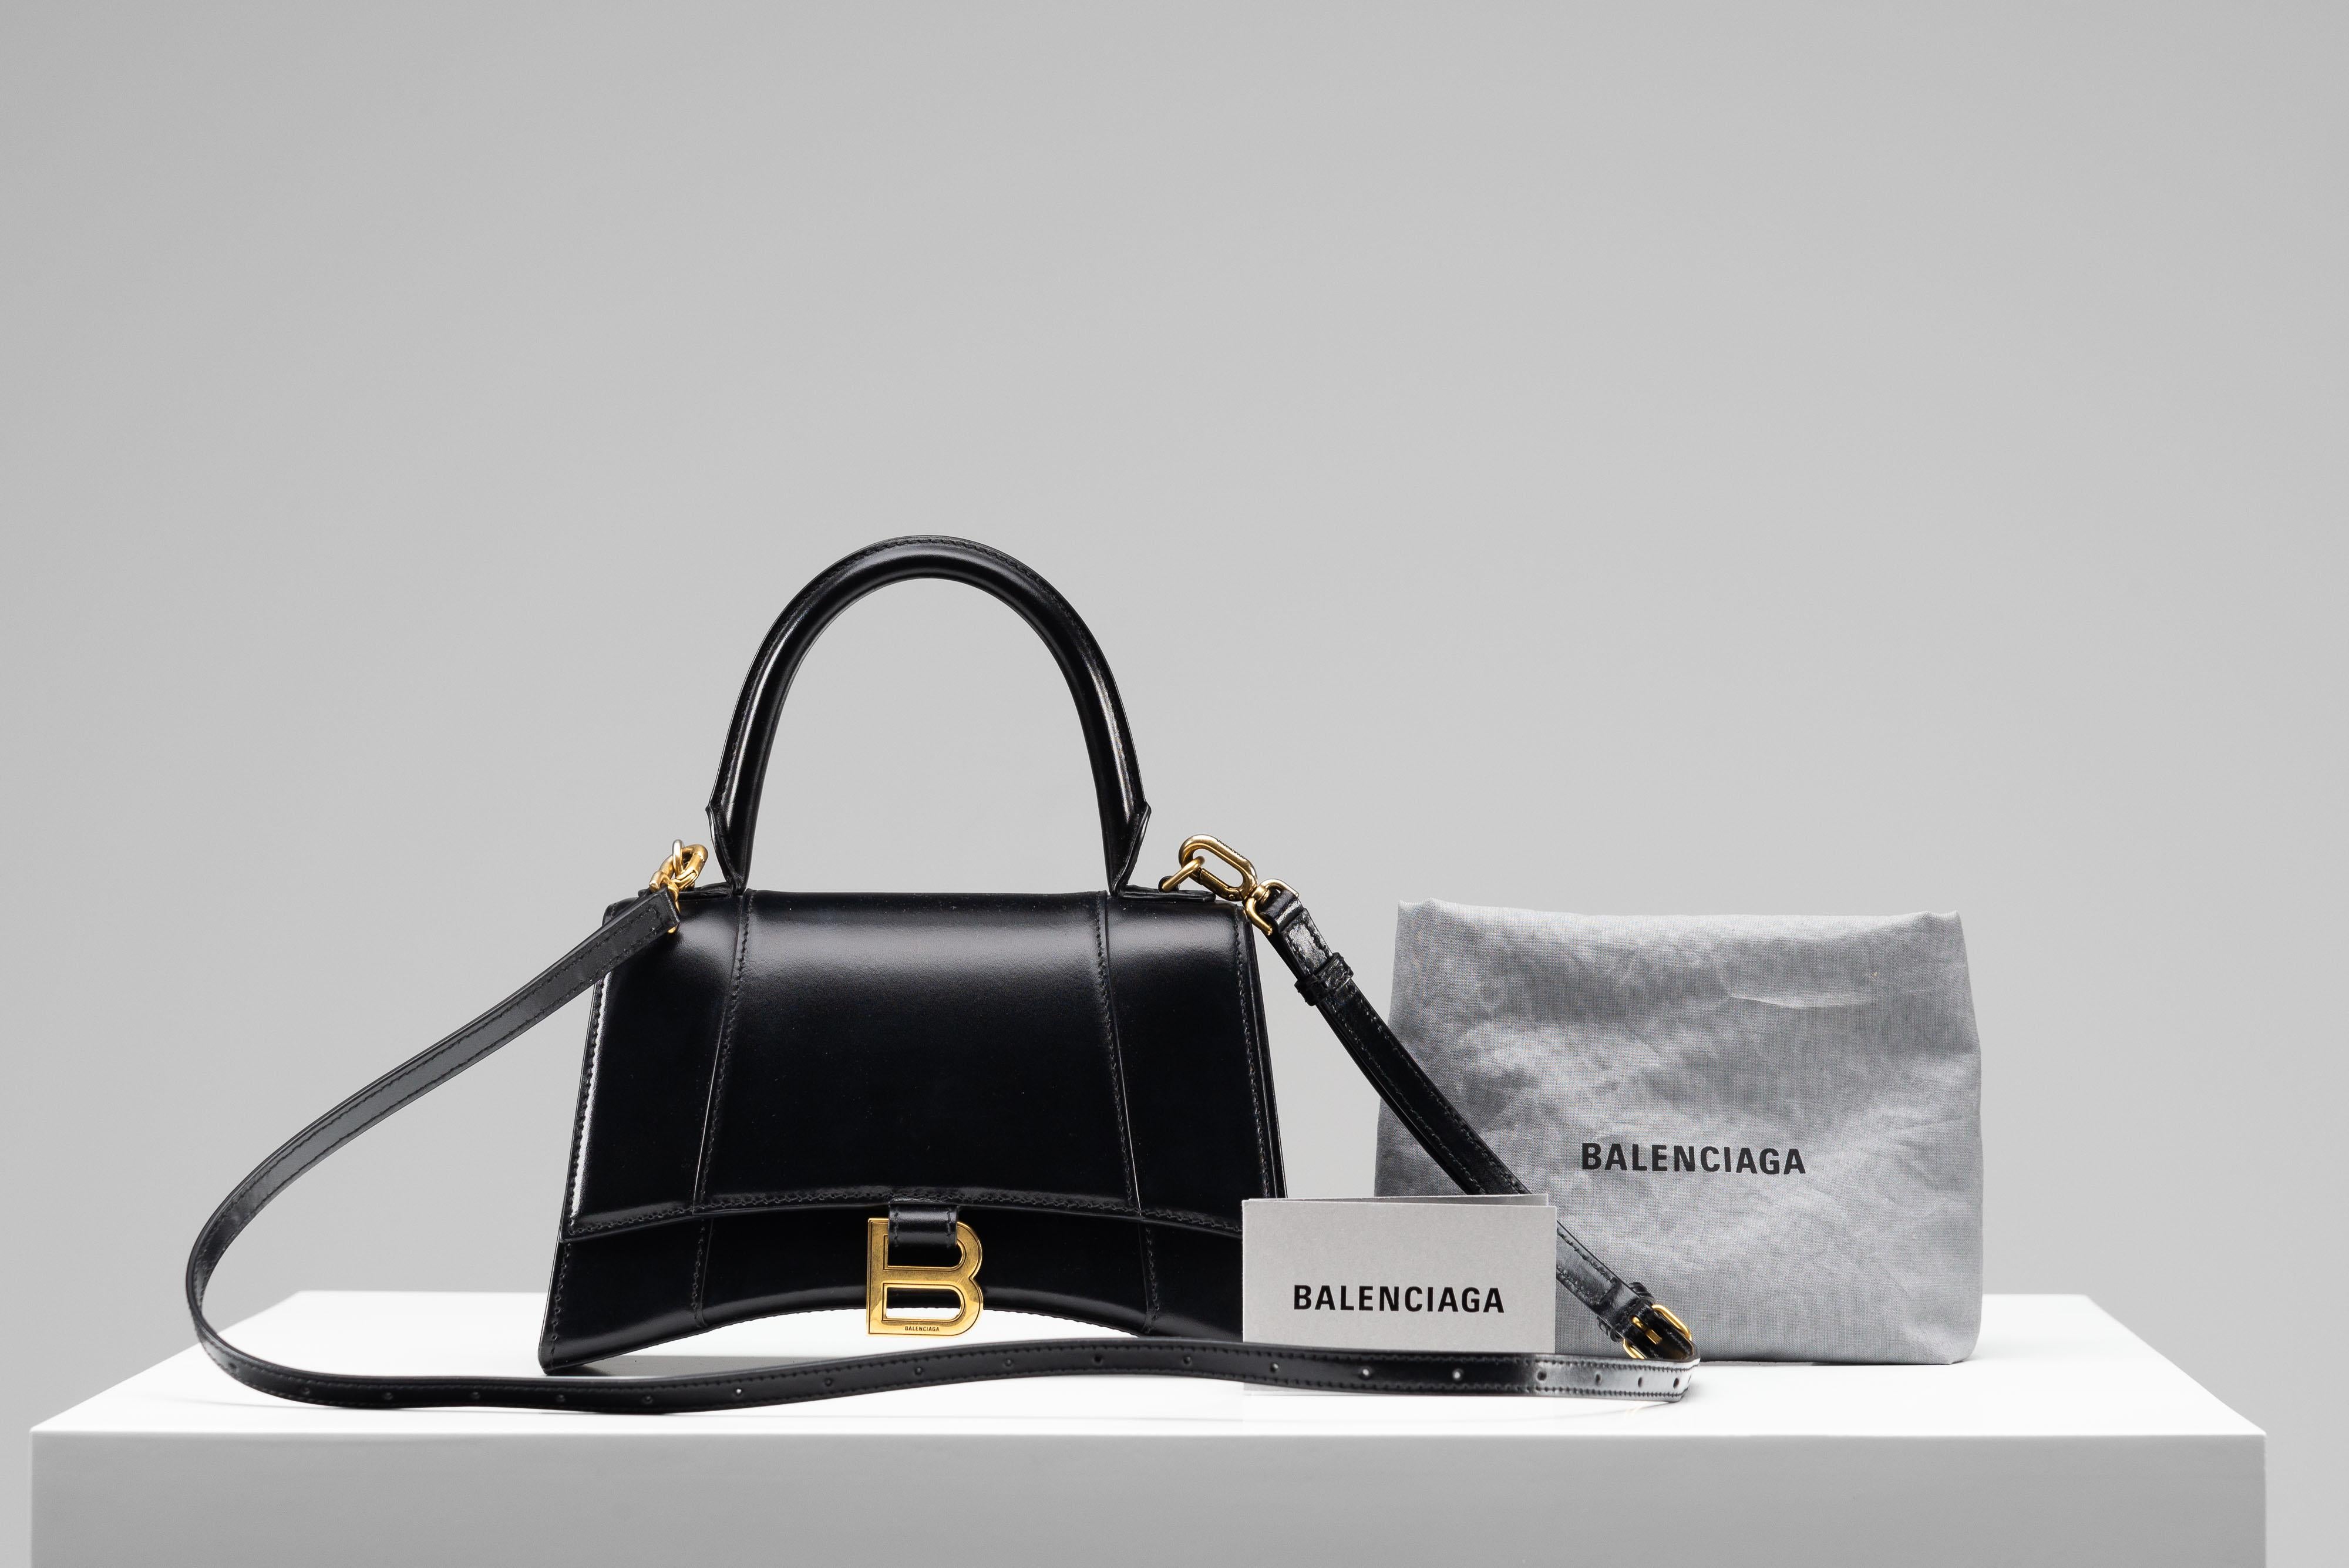 From the collection of SAVINETI we offer this Balenciaga Hourglass Bag:
- Brand: Balenciaga
- Model: Hourglass Small
- Color: Black
- Year: 2023
- Materials: shiny box calfskin, nappa lambskin lining, brass
- Condition: Excellent
- Extras: Dustbag &